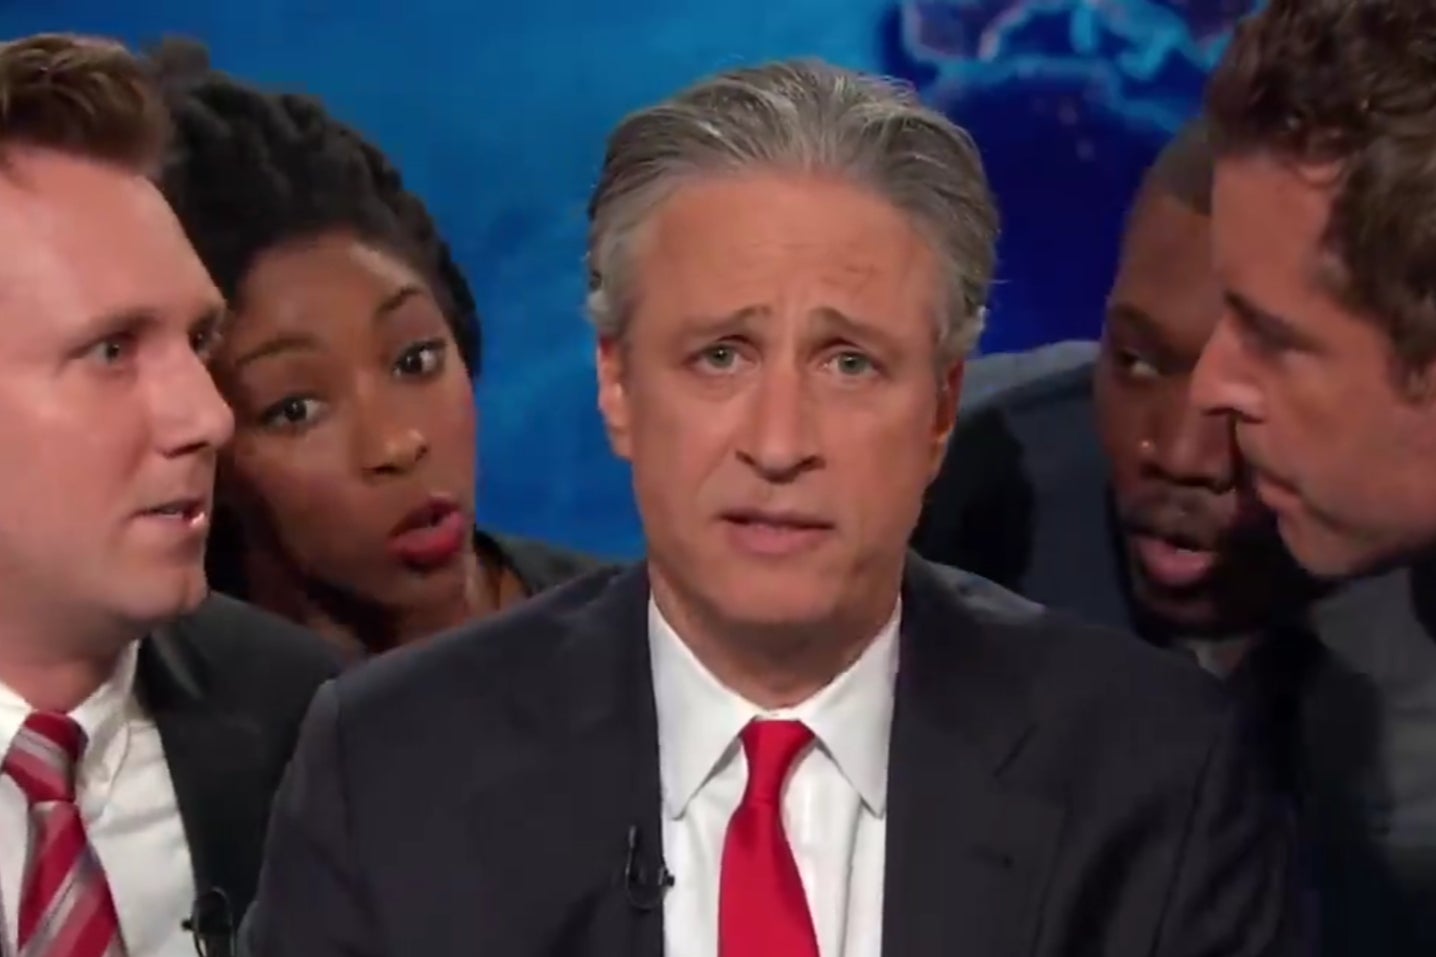 Jon Stewart appears in the controversial Daily Show sketch from July 2014